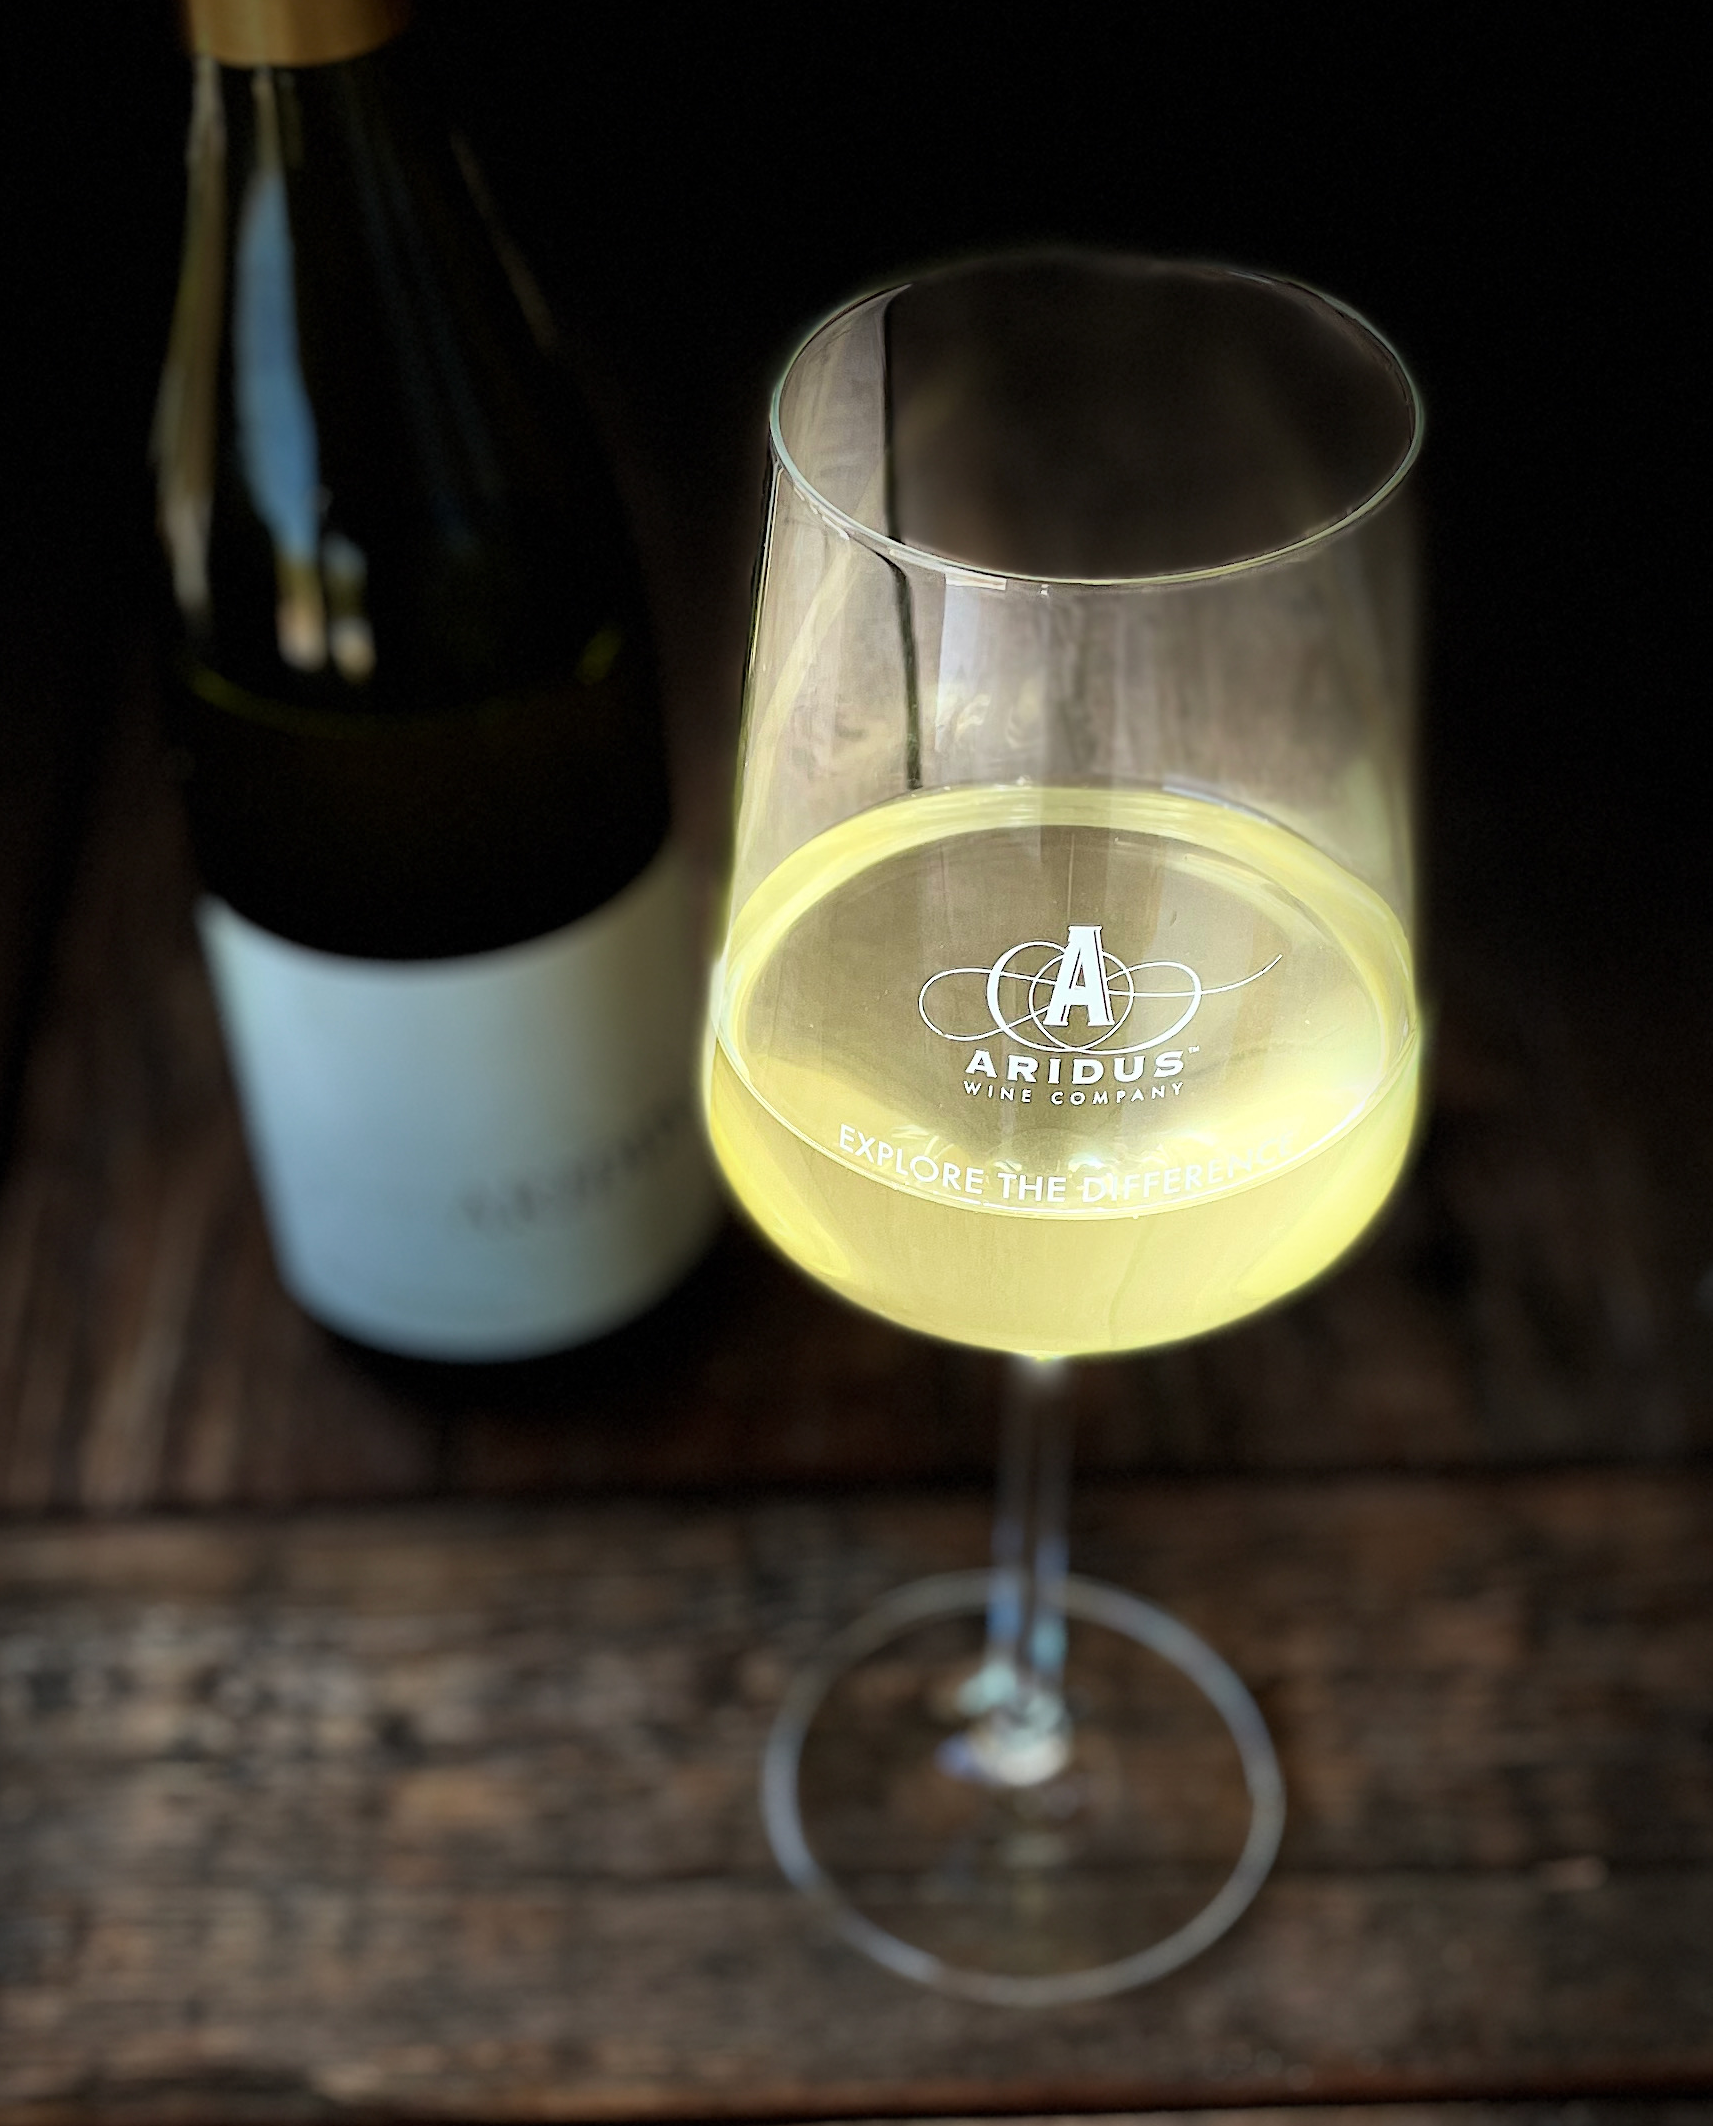 Is Chardonnay Sweet or Dry? All About The Popular White Wine — Aridus